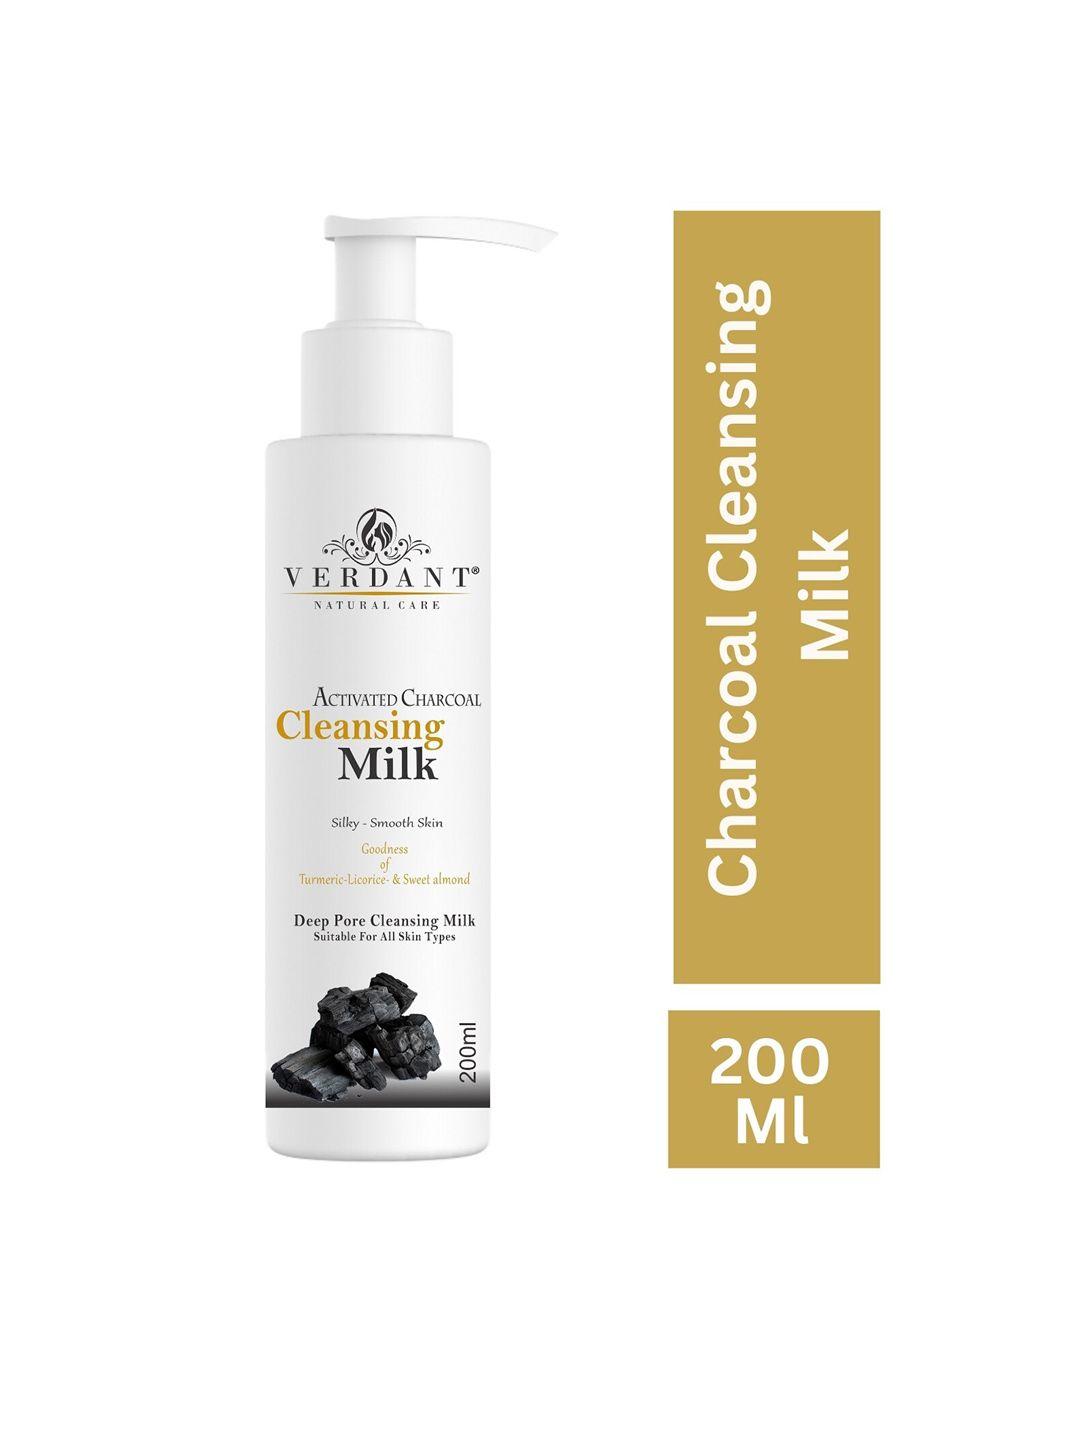 verdant natural care activated charcoal cleansing milk & make up remover 200ml